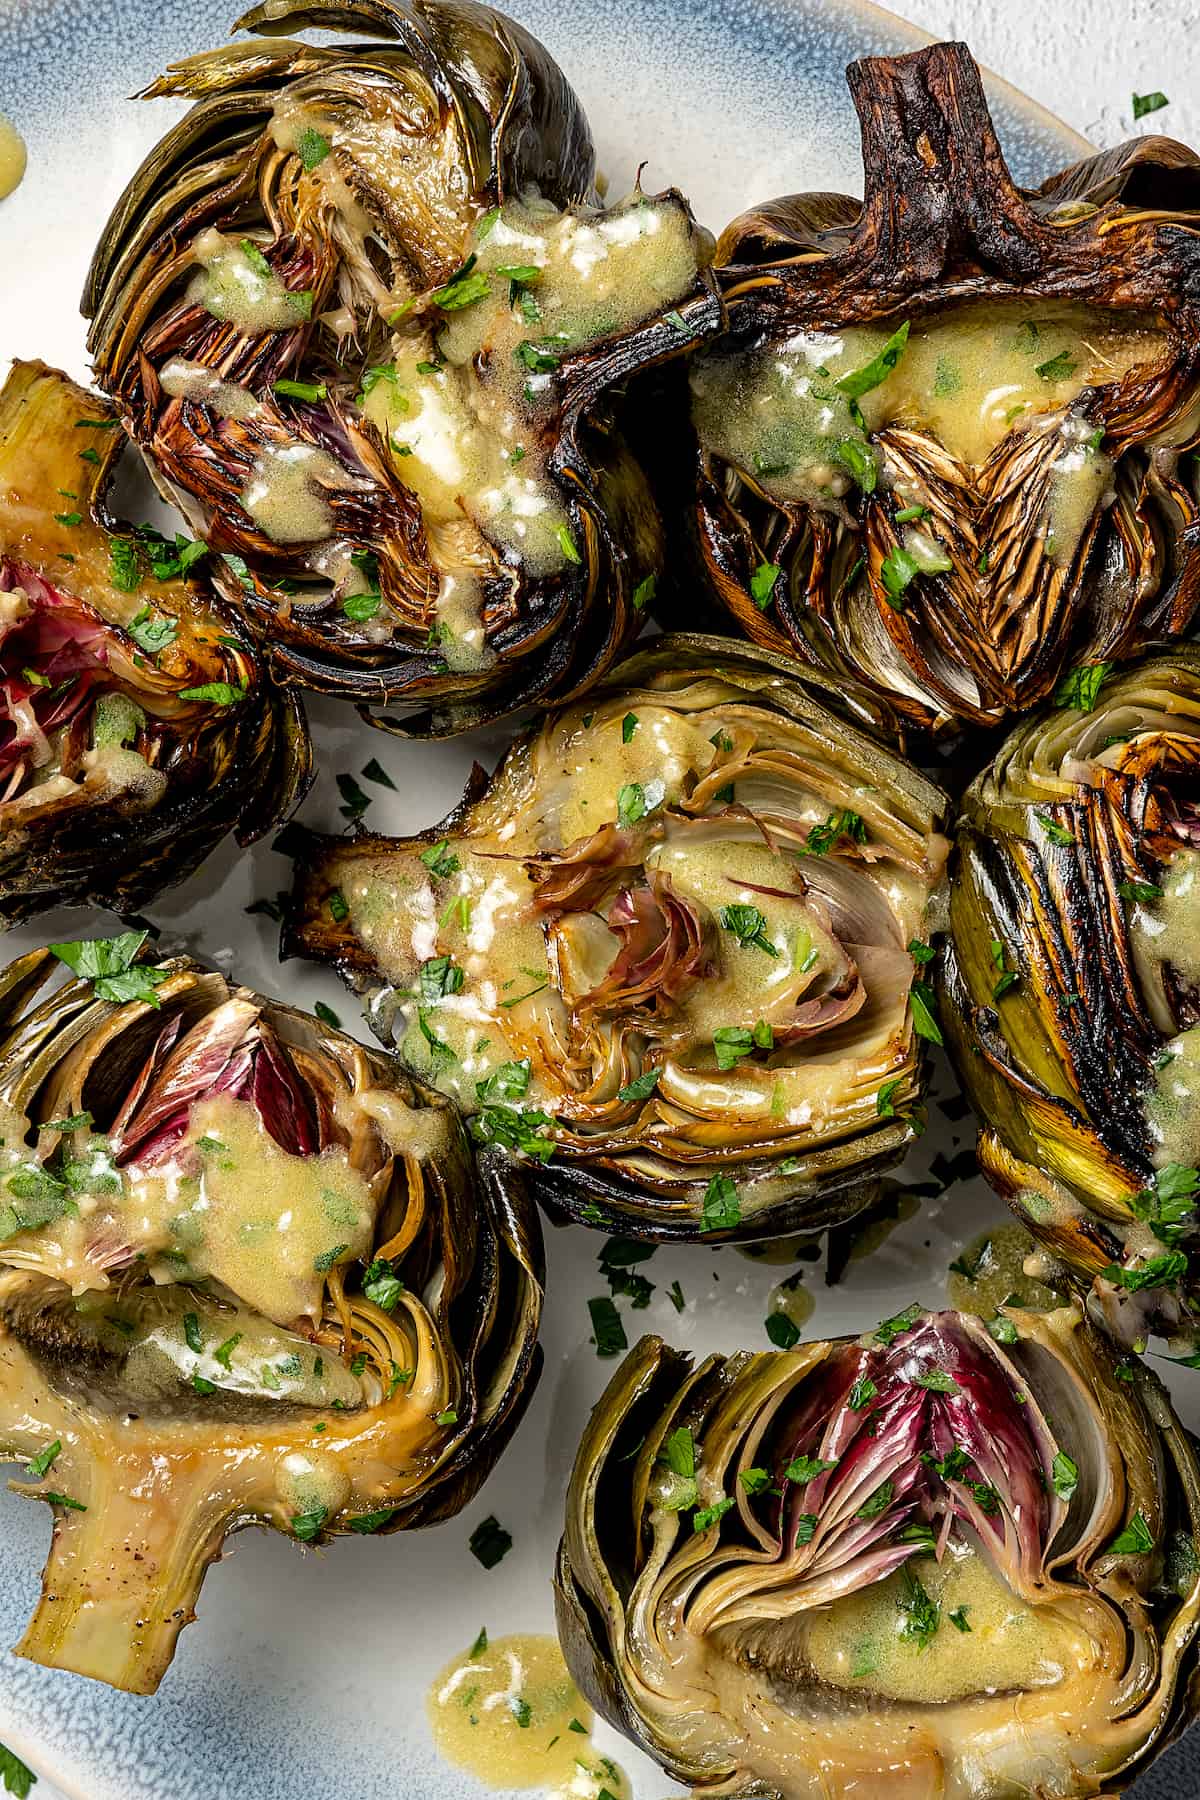 Roasted artichokes, cut side up, drizzled with dressing.